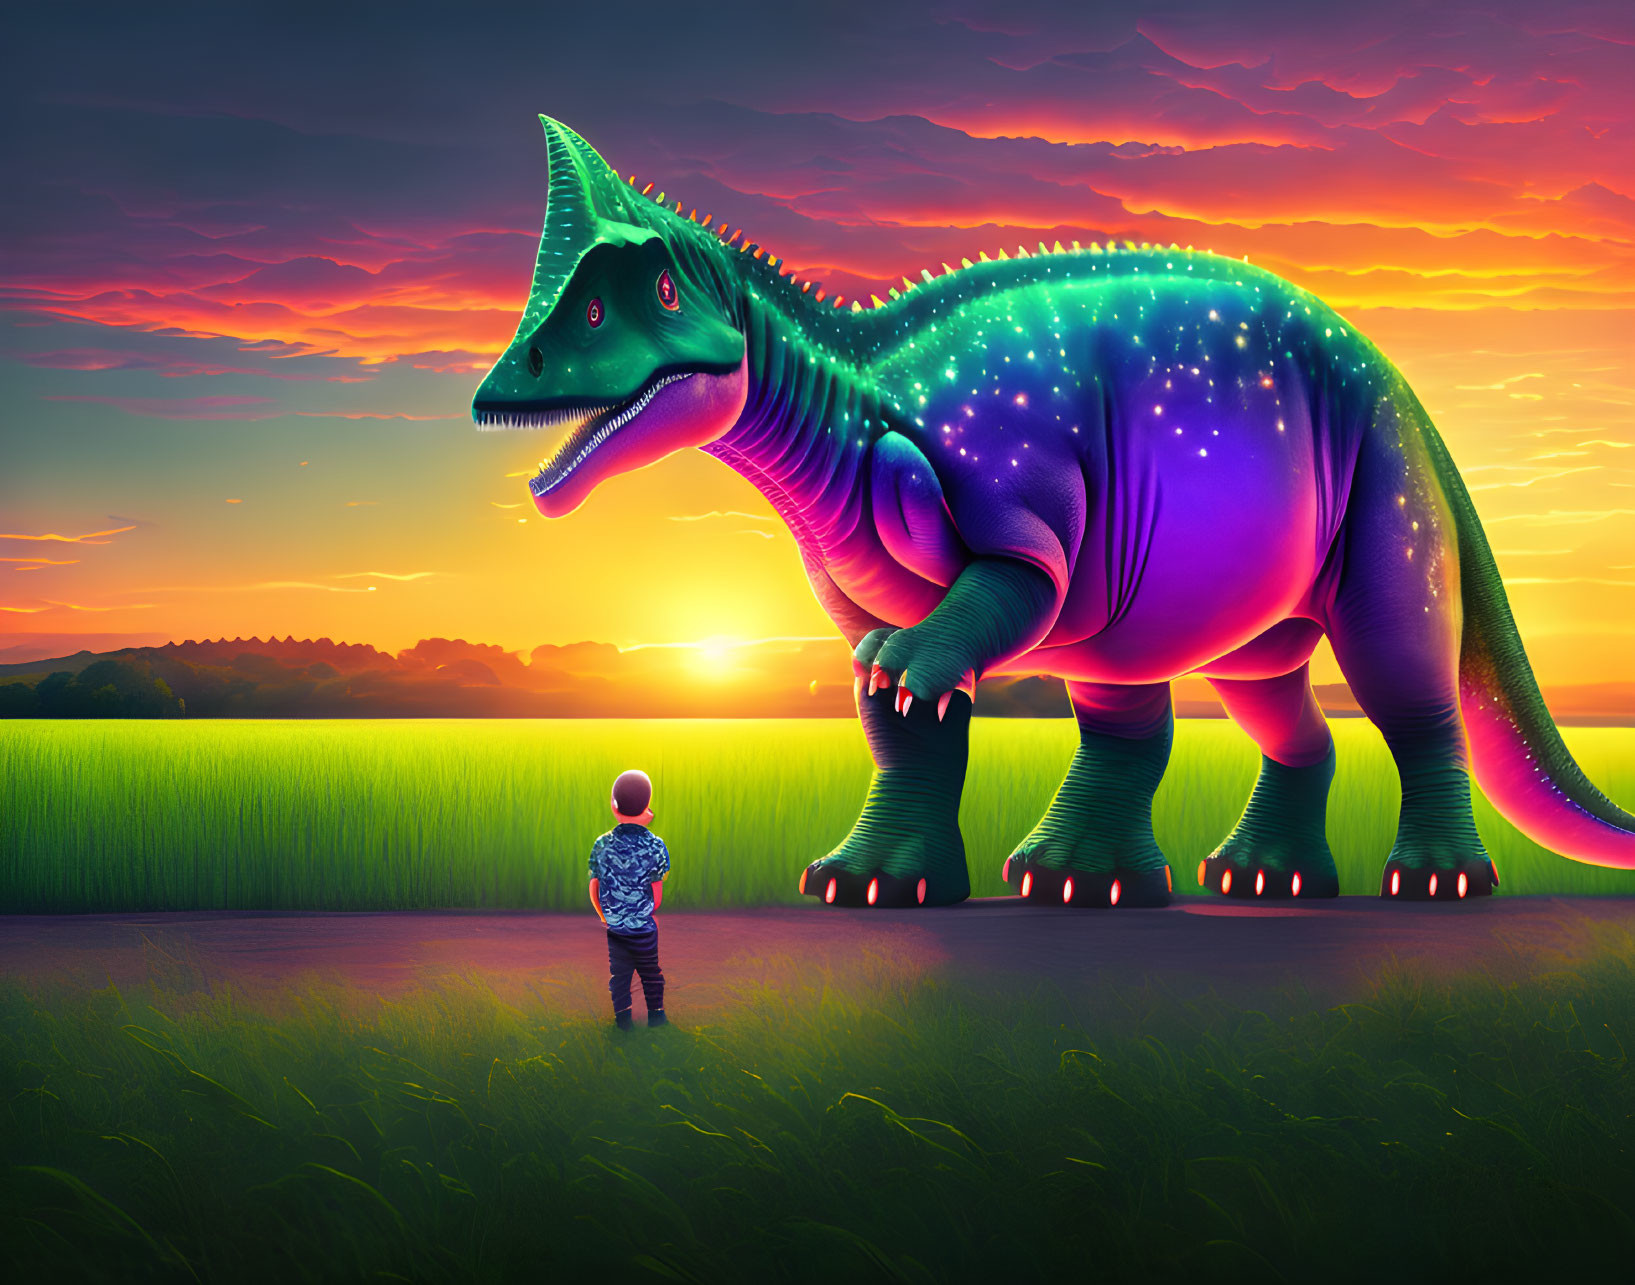 Child observing glowing dinosaur in sunset scene with vibrant sky and green field.